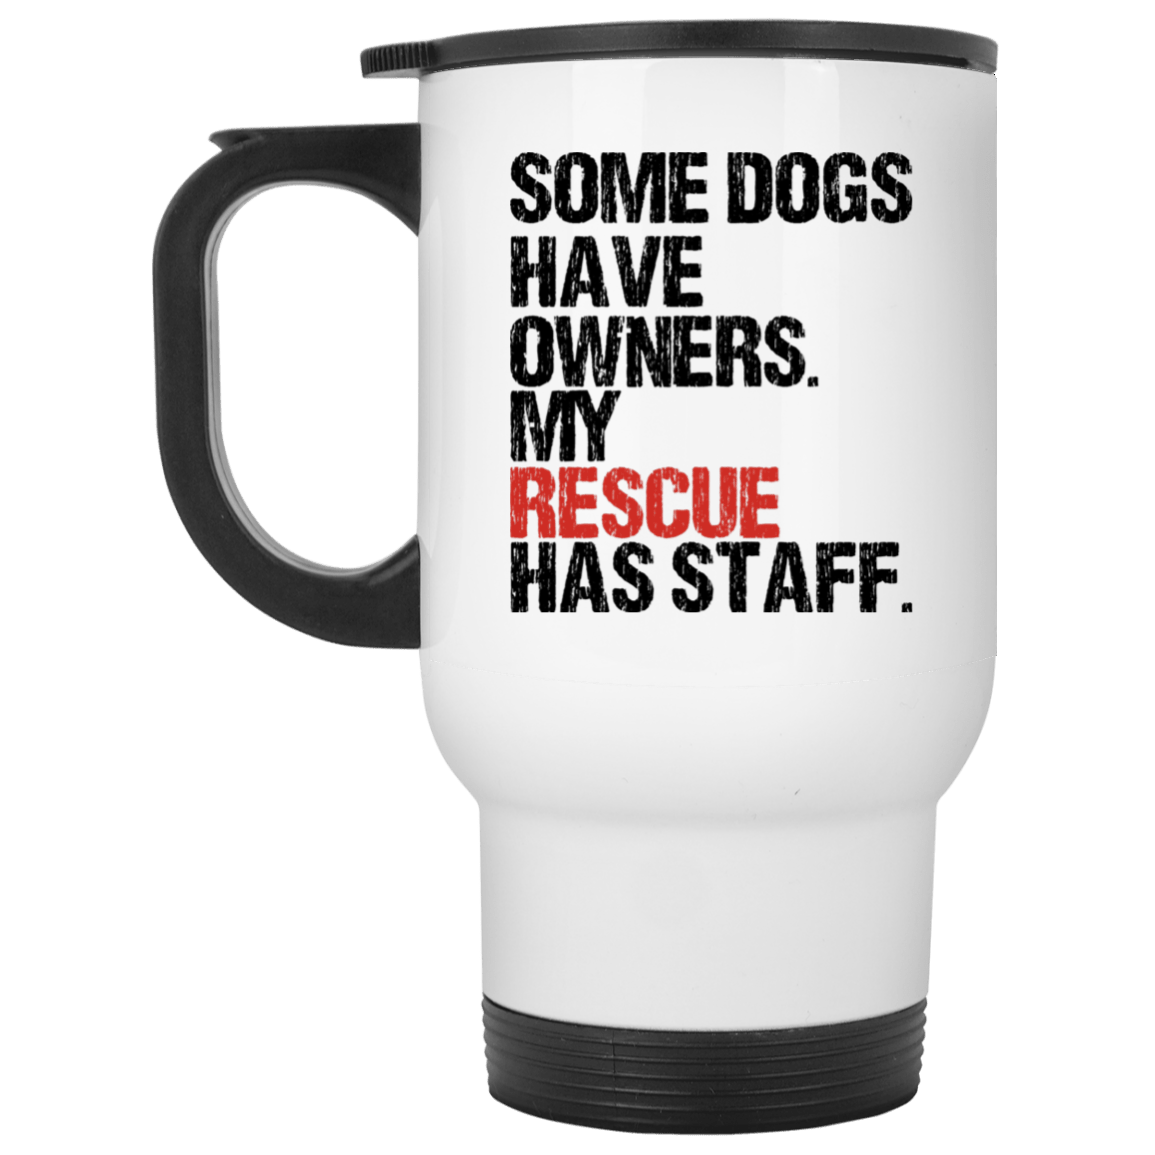 Some Dogs Have Owners - Mugs.